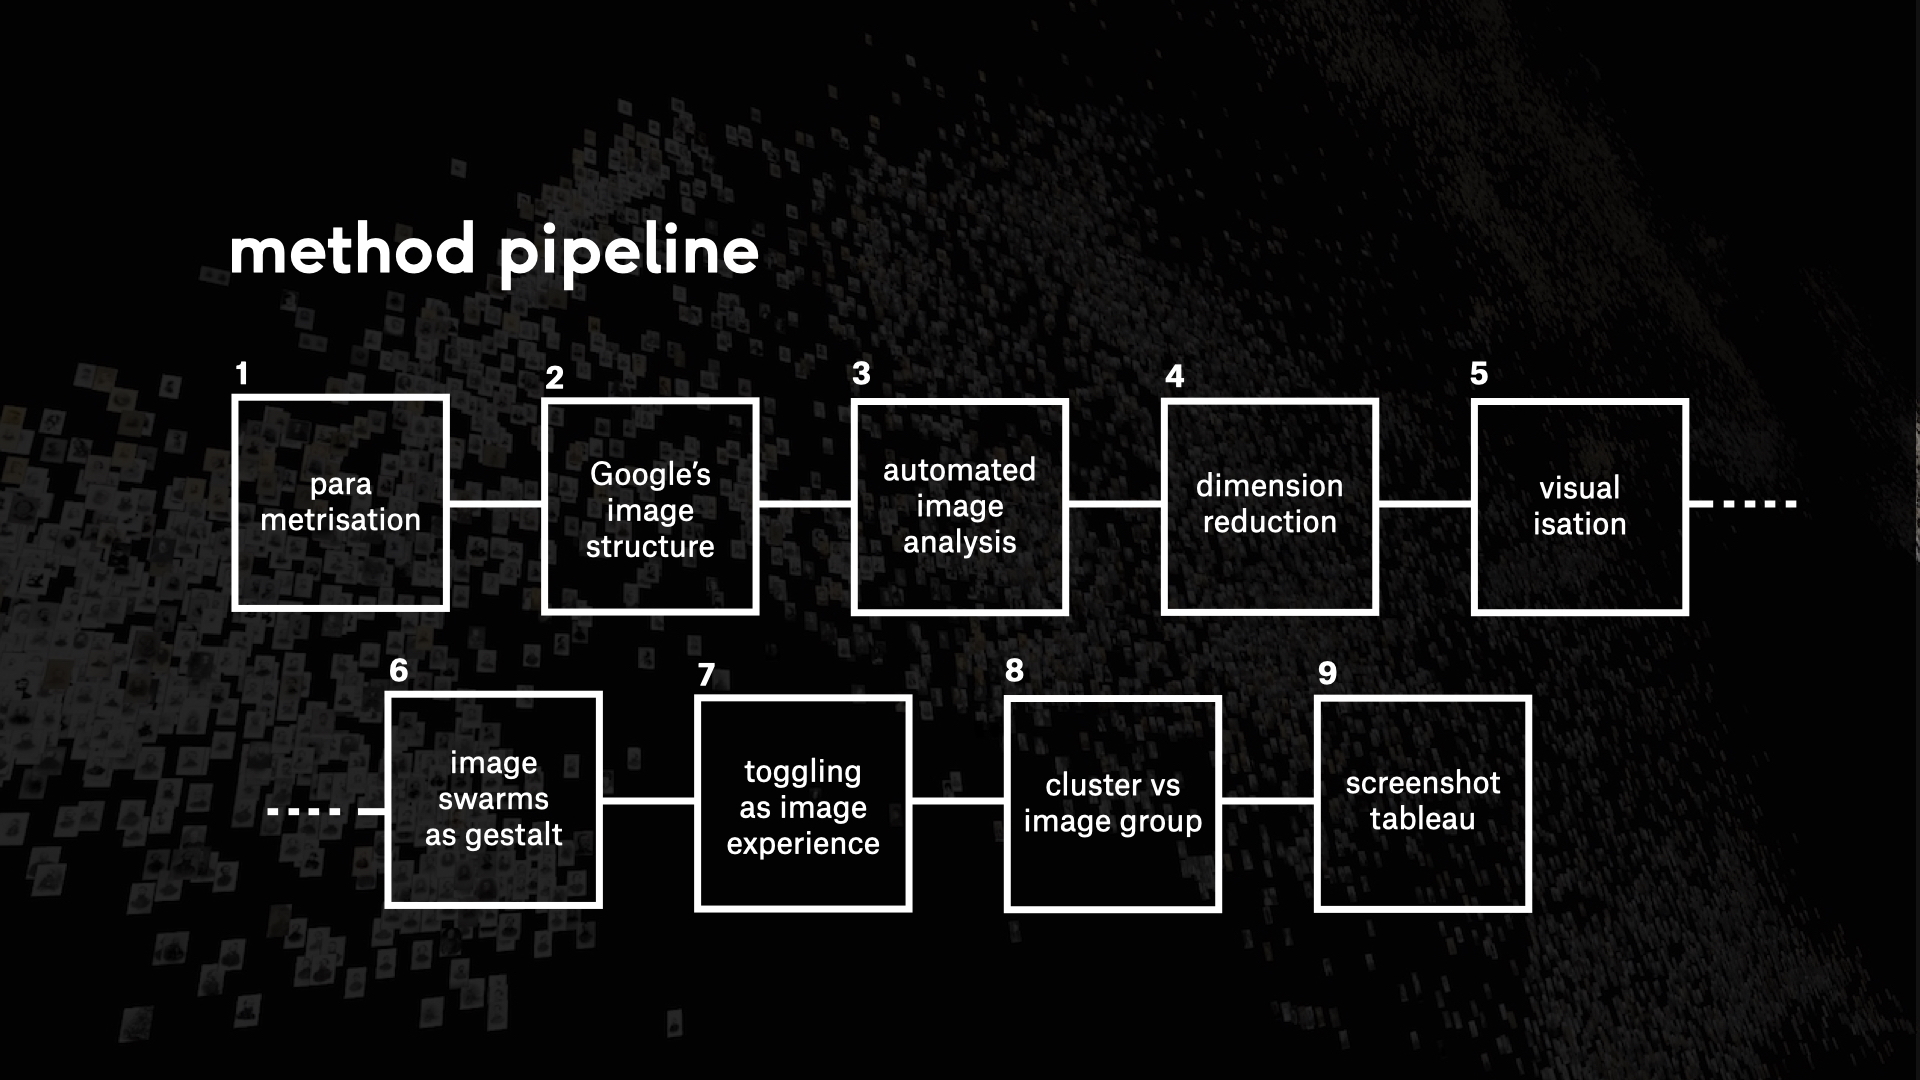 black and white image of a flowchart. There are nine boxes in the flowchart which outline the steps of the method pipeline